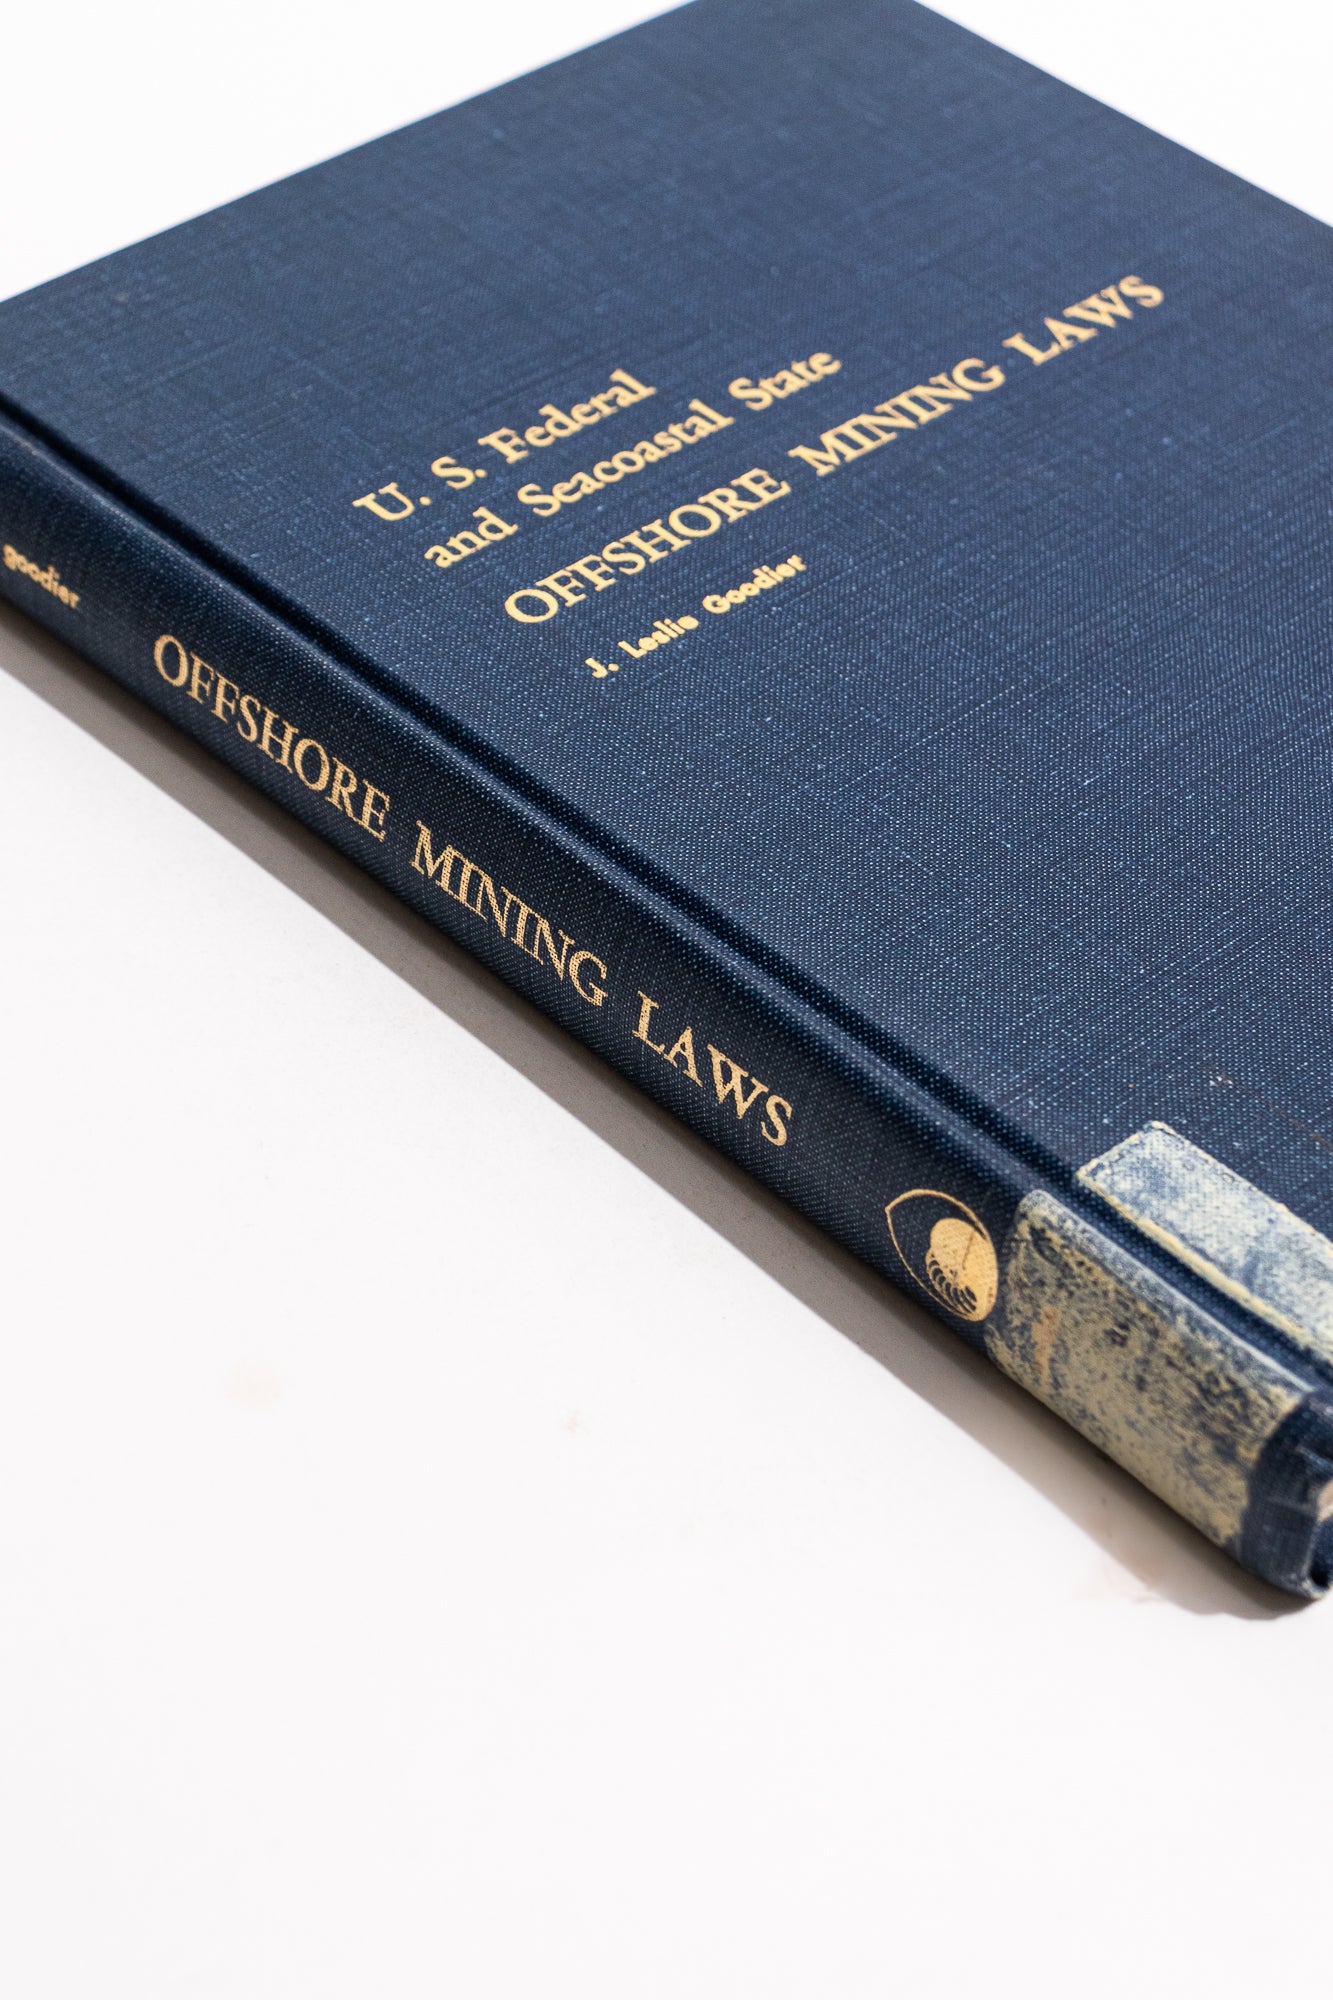 U.S. Federal and Seacoastal State: Offshore Mining Laws - Stemcell Science Shop